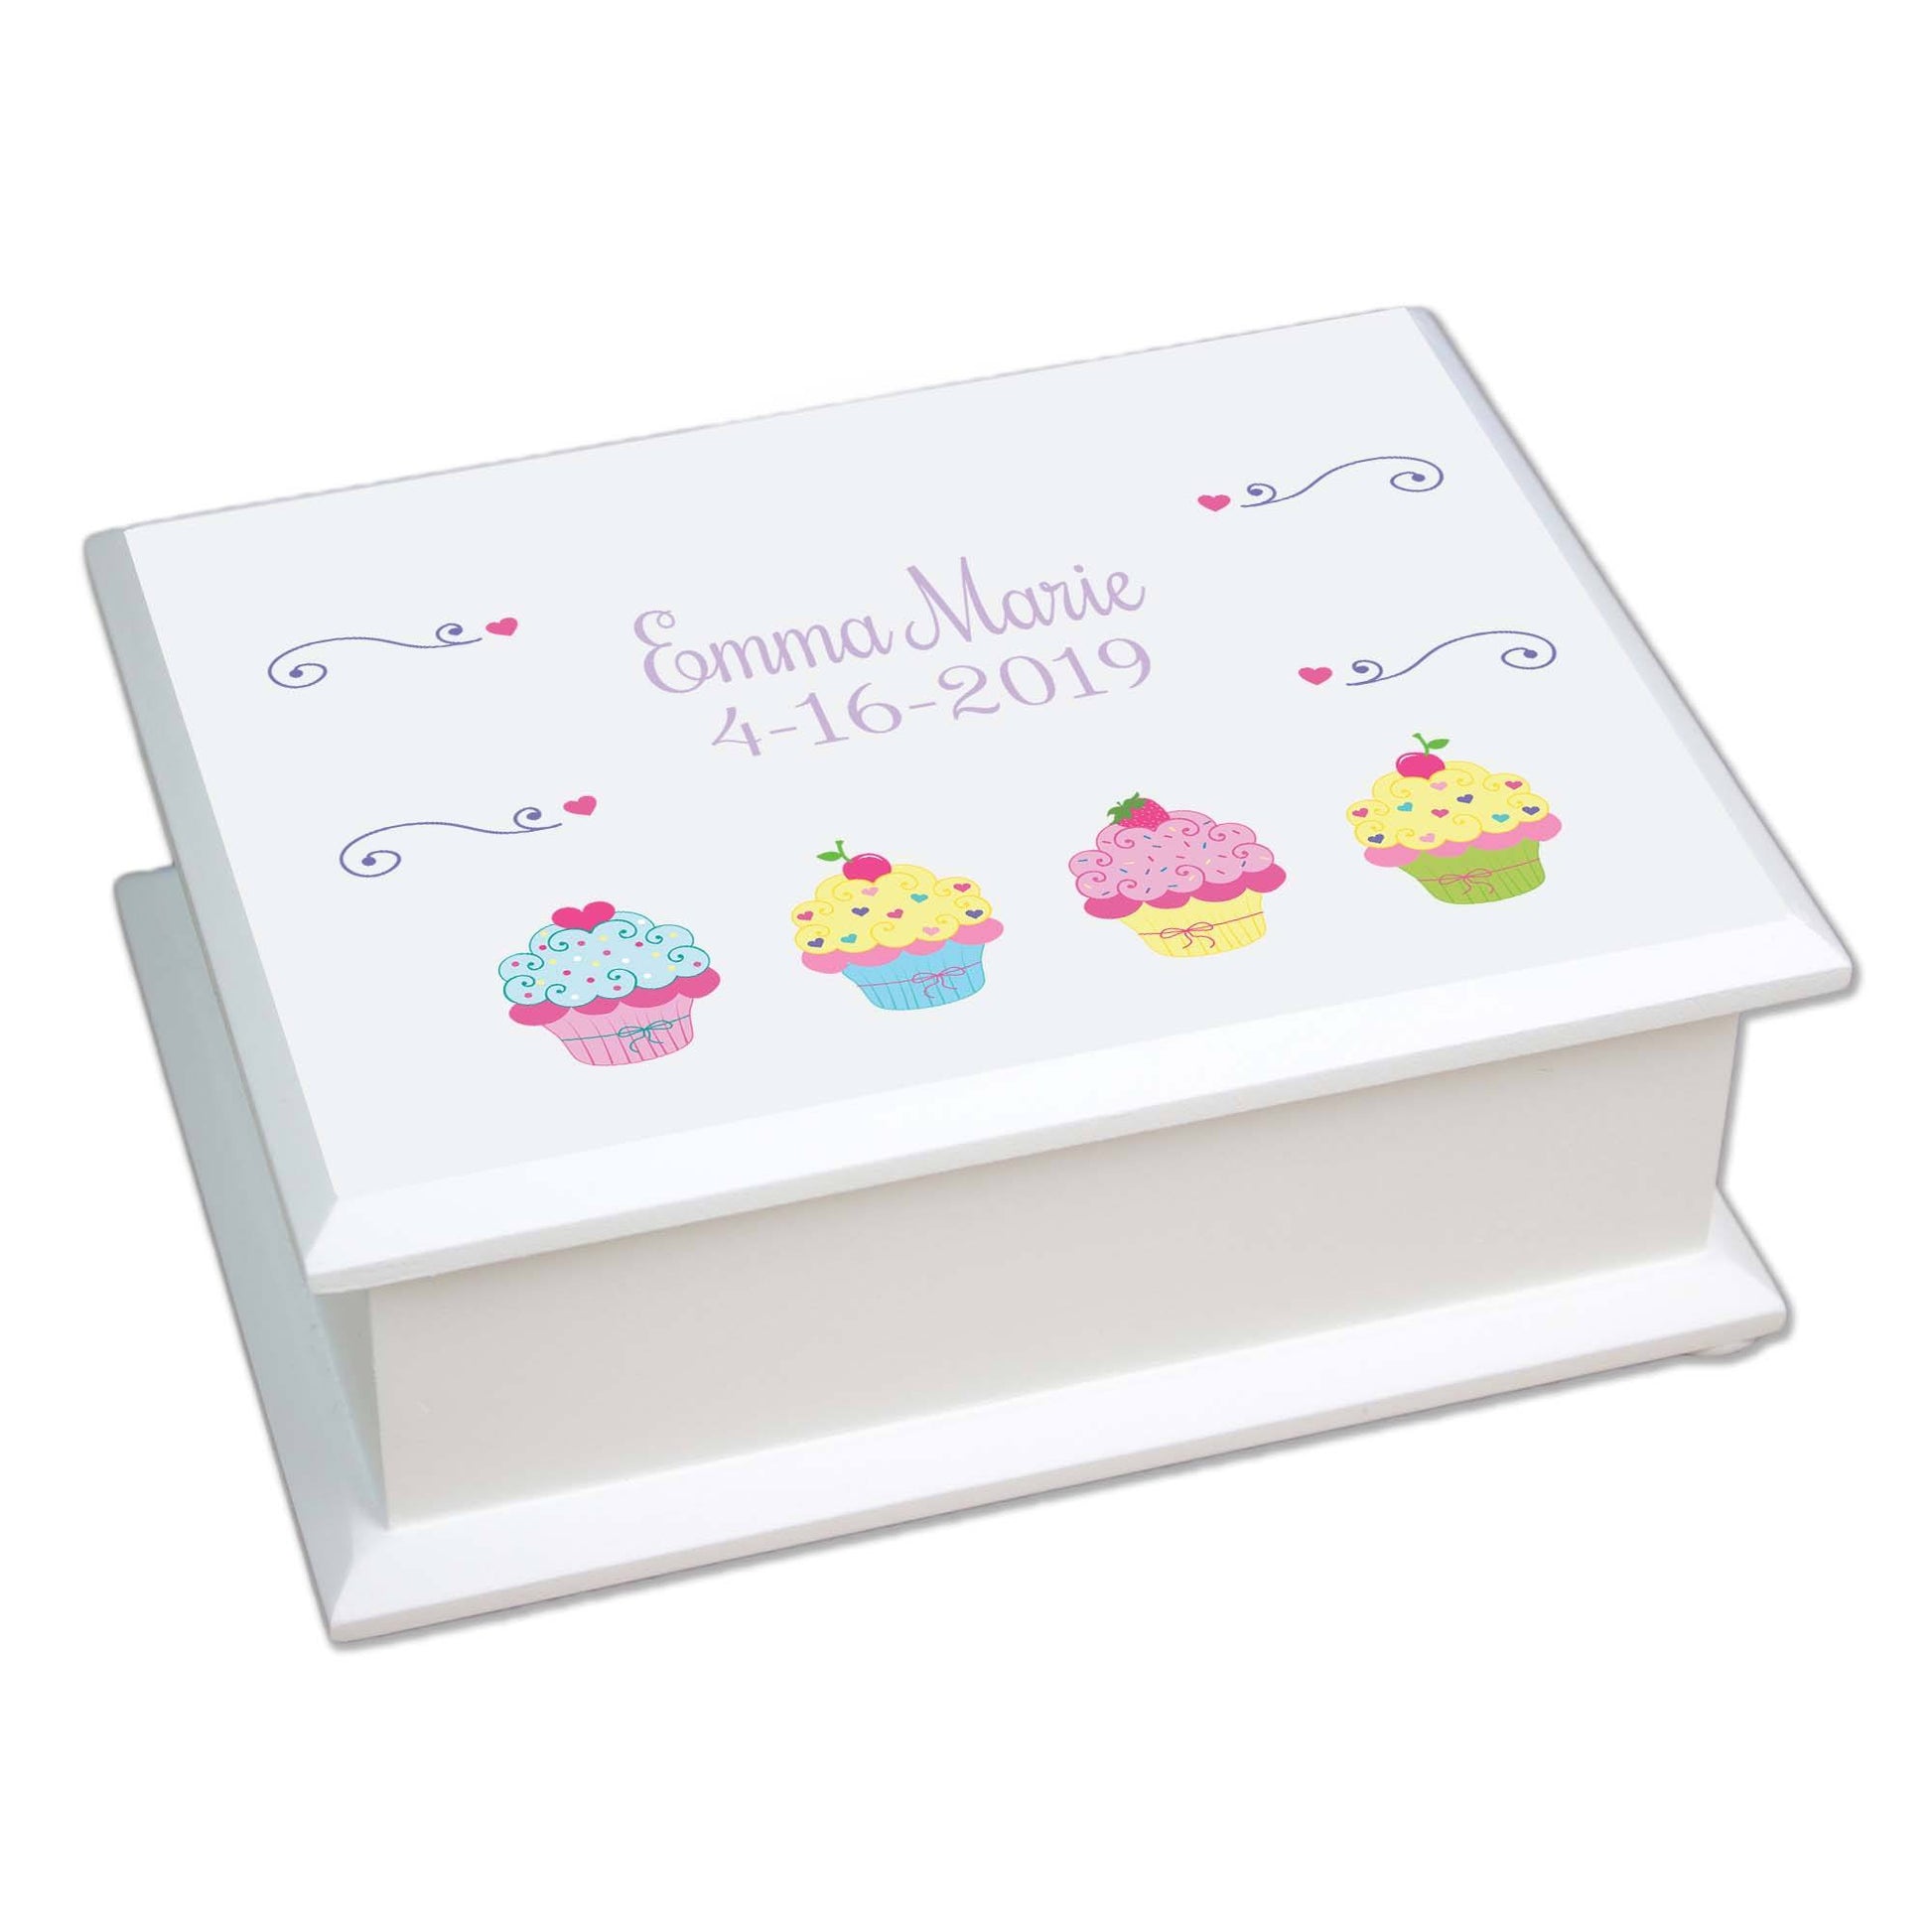 Personalized Lift Top Jewelry Box with Cupcake design